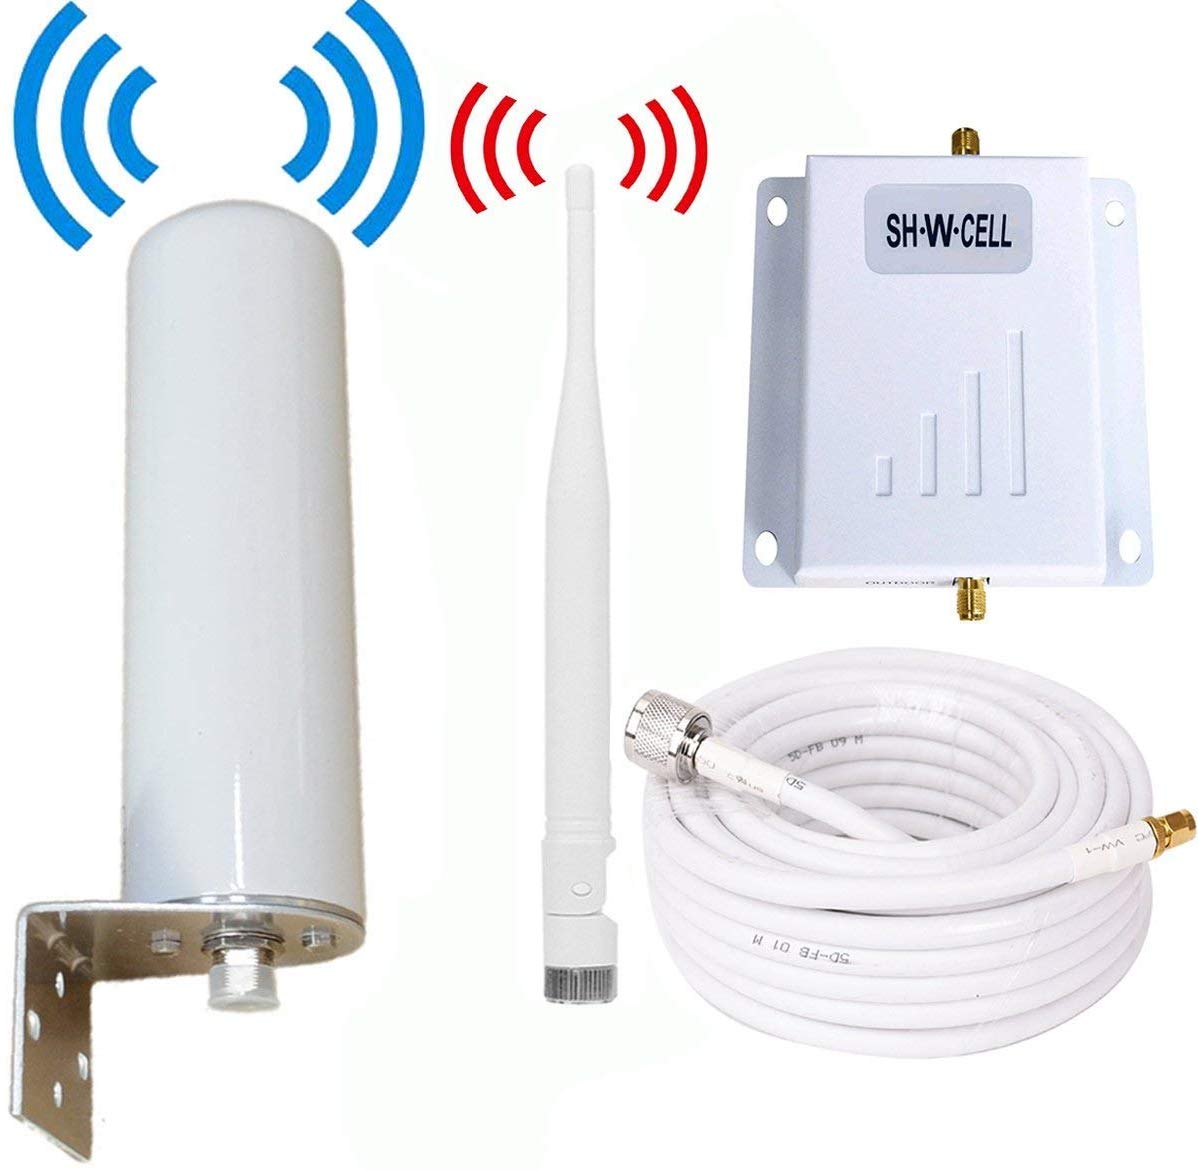 Cell Phone Signal Booster ATT T-Mobile 4G LTE Band12/17 700MHz FDD AT&T